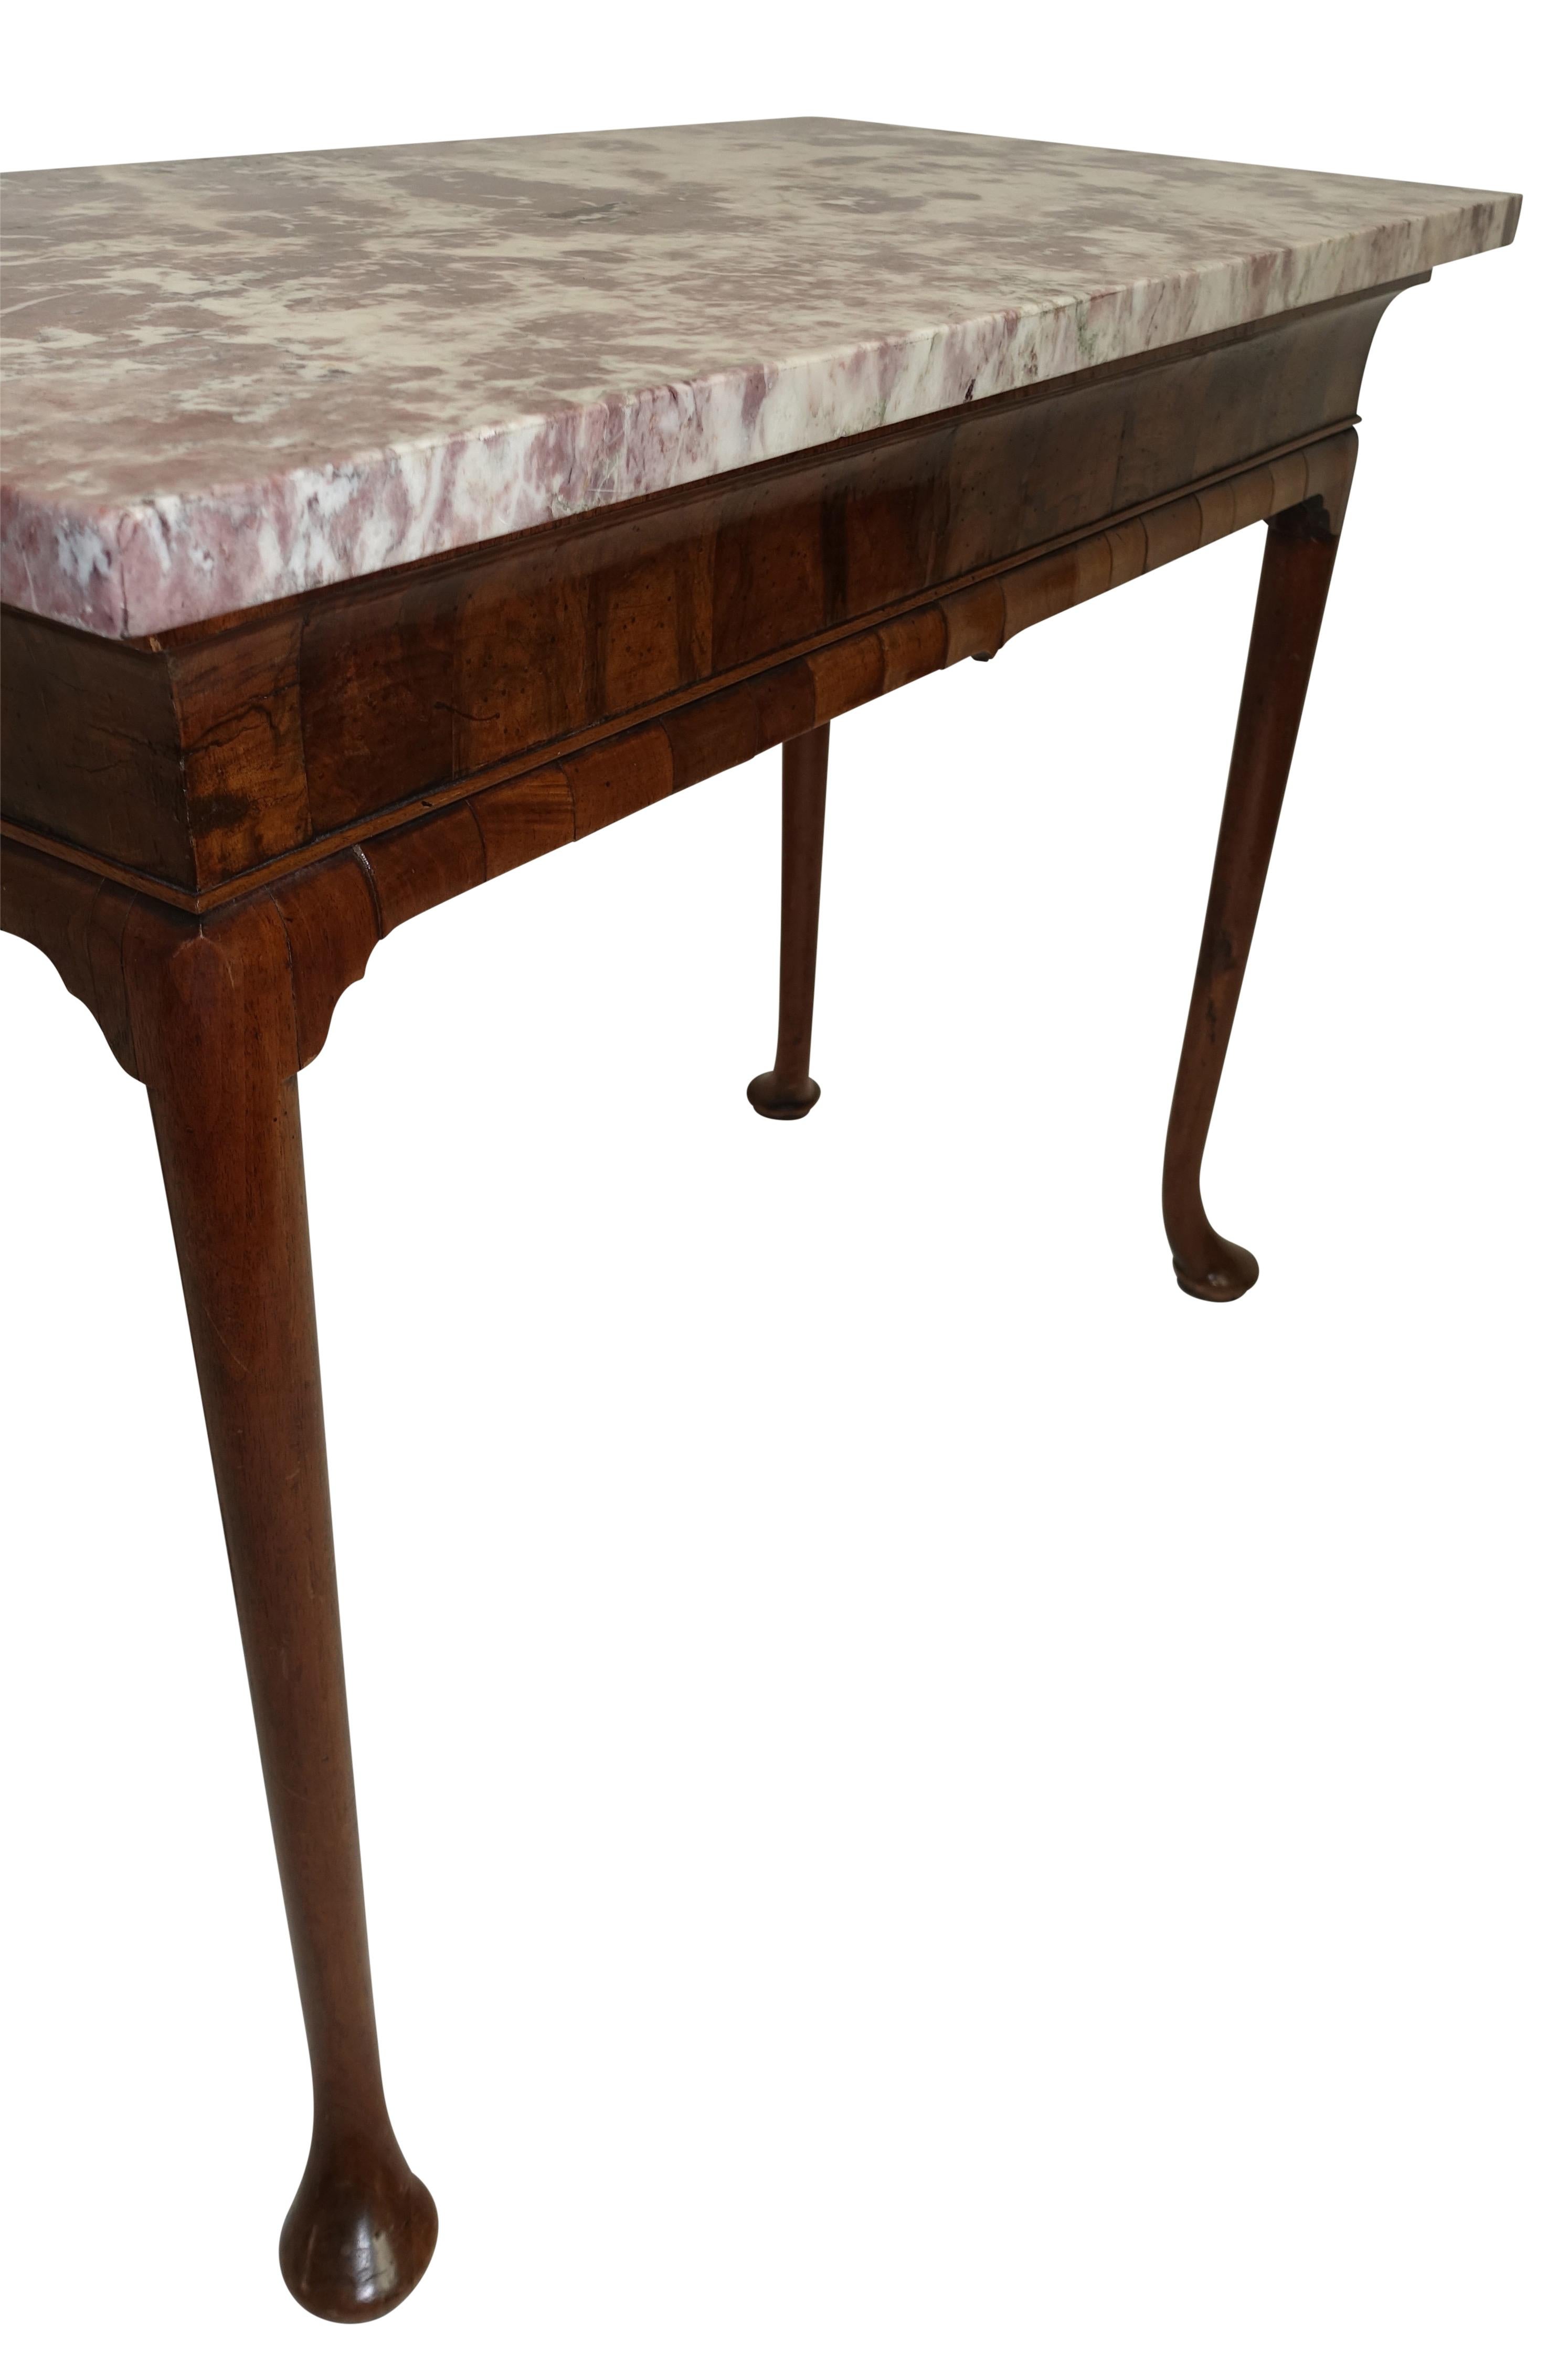 English George II Period Walnut Pier / Console Table with Marble Top For Sale